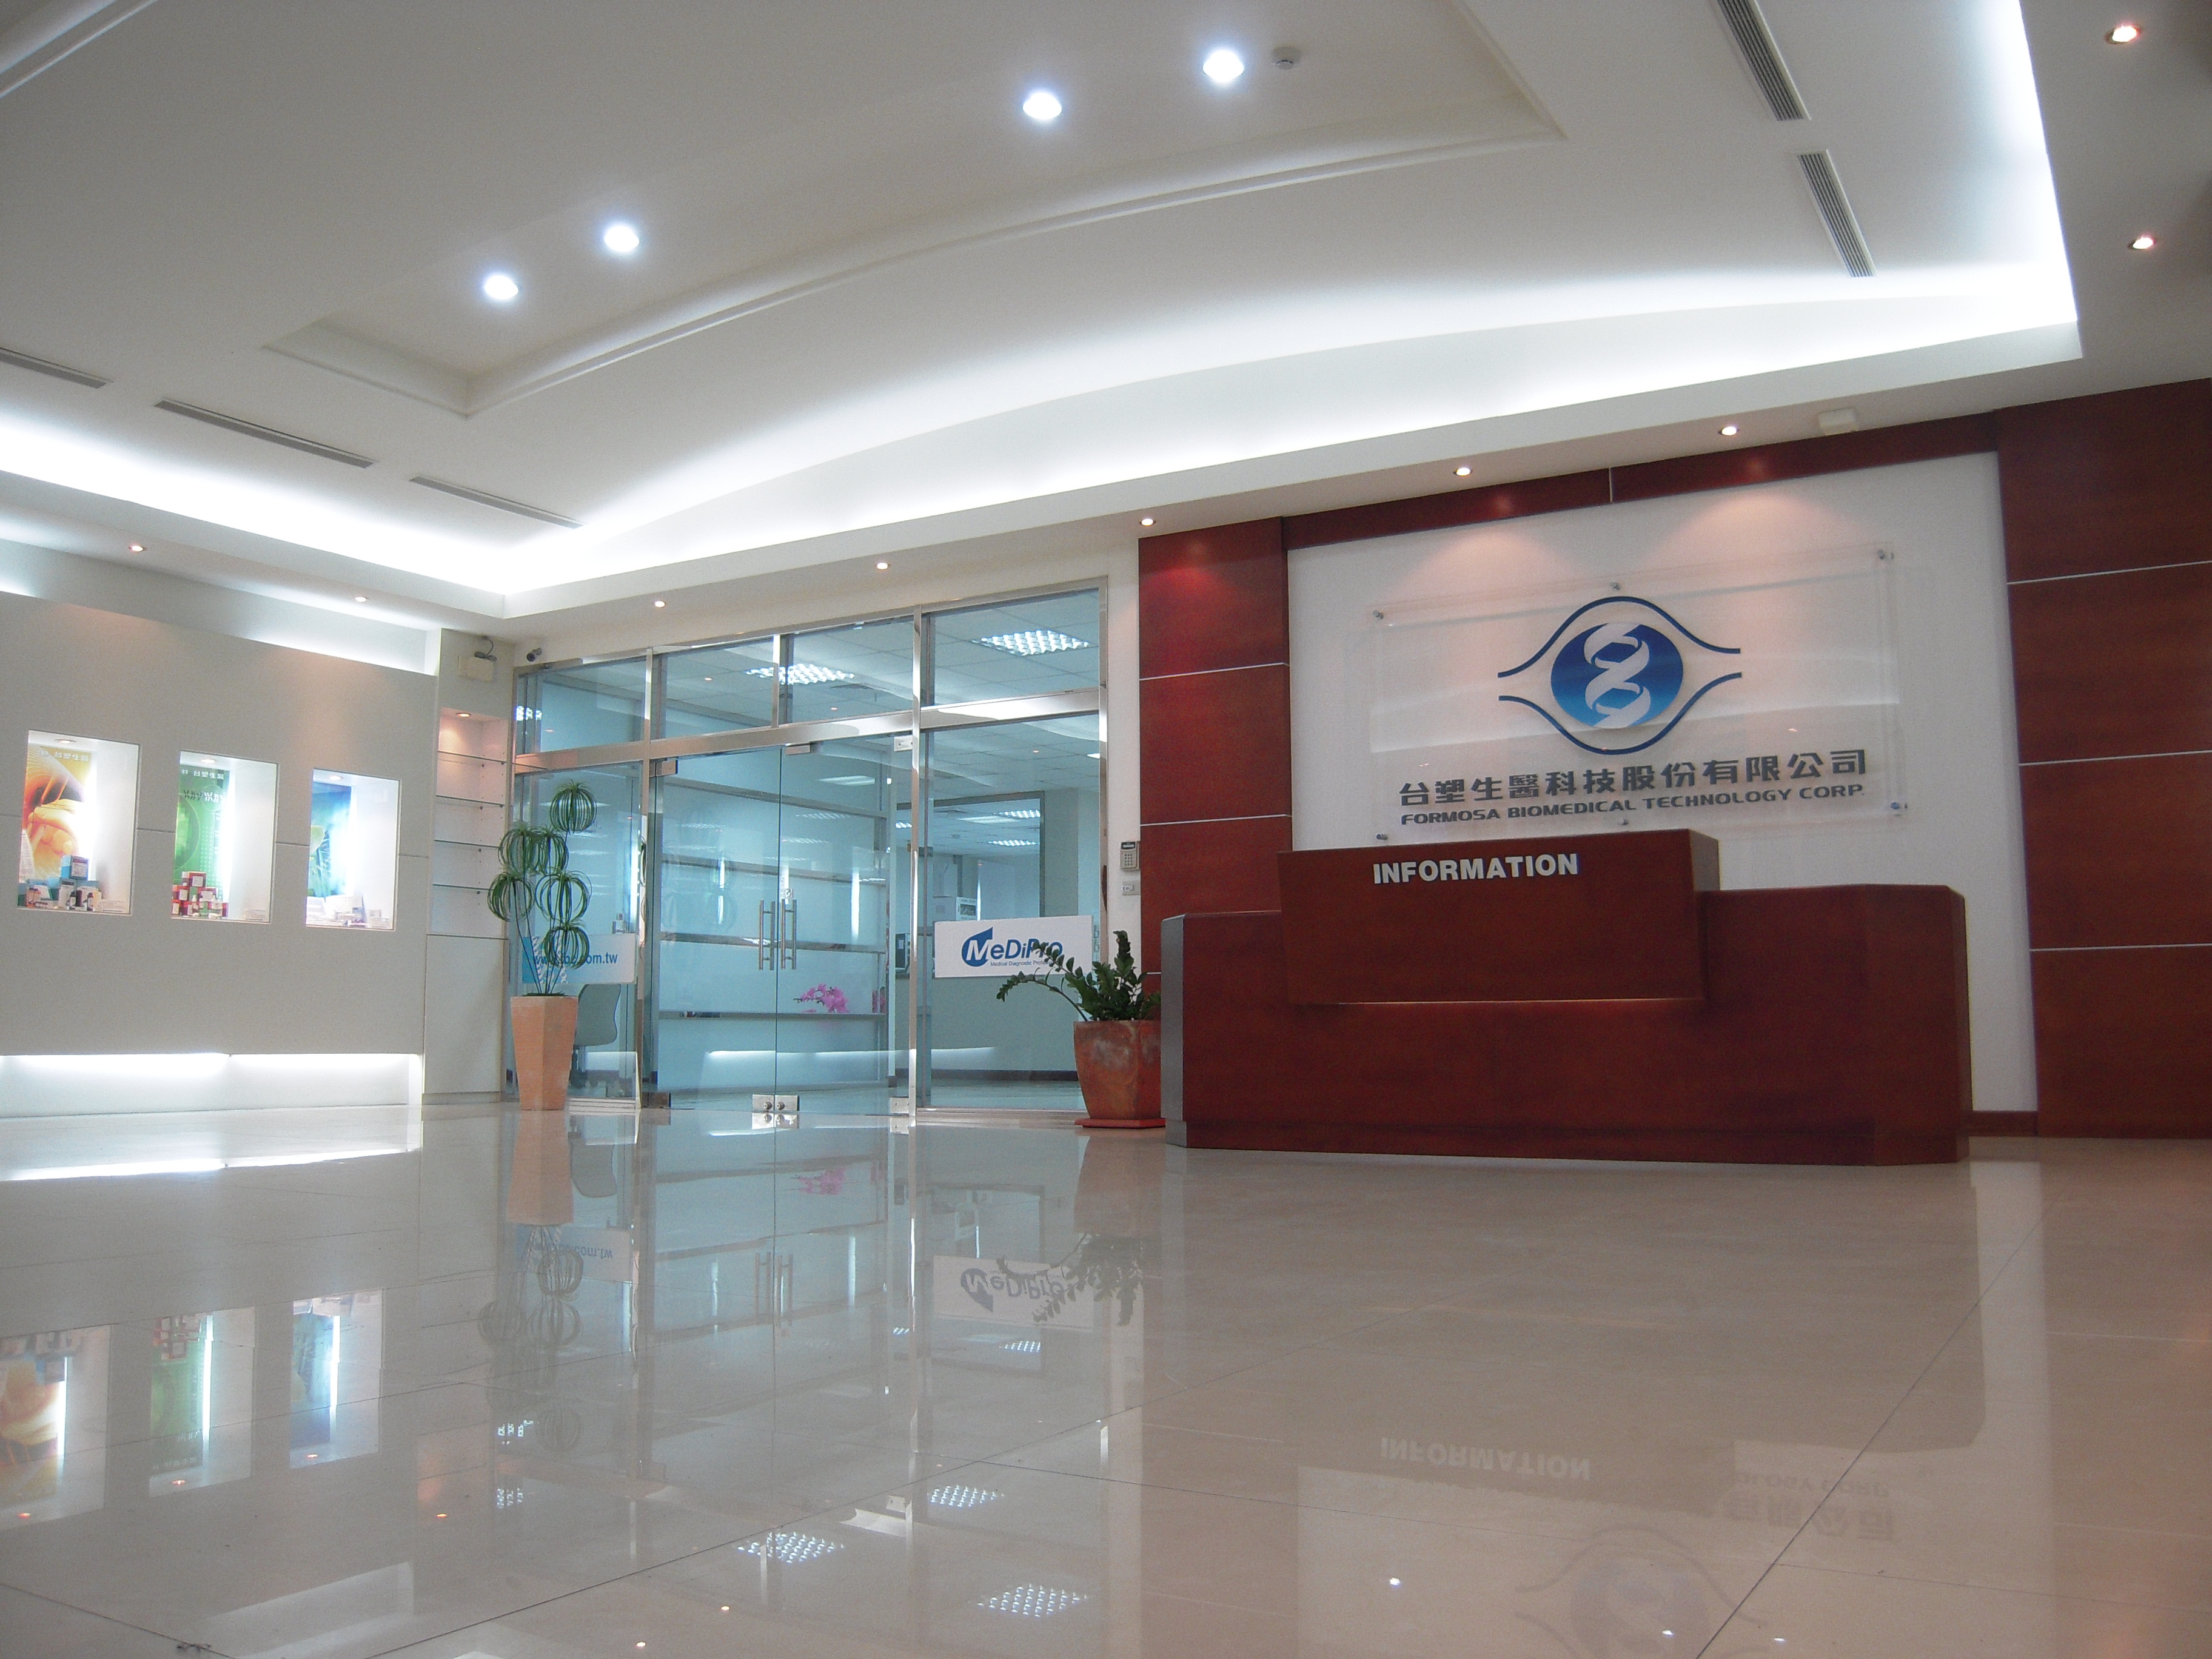 The Formosa Biomedical Technology Corporation officially began operation.